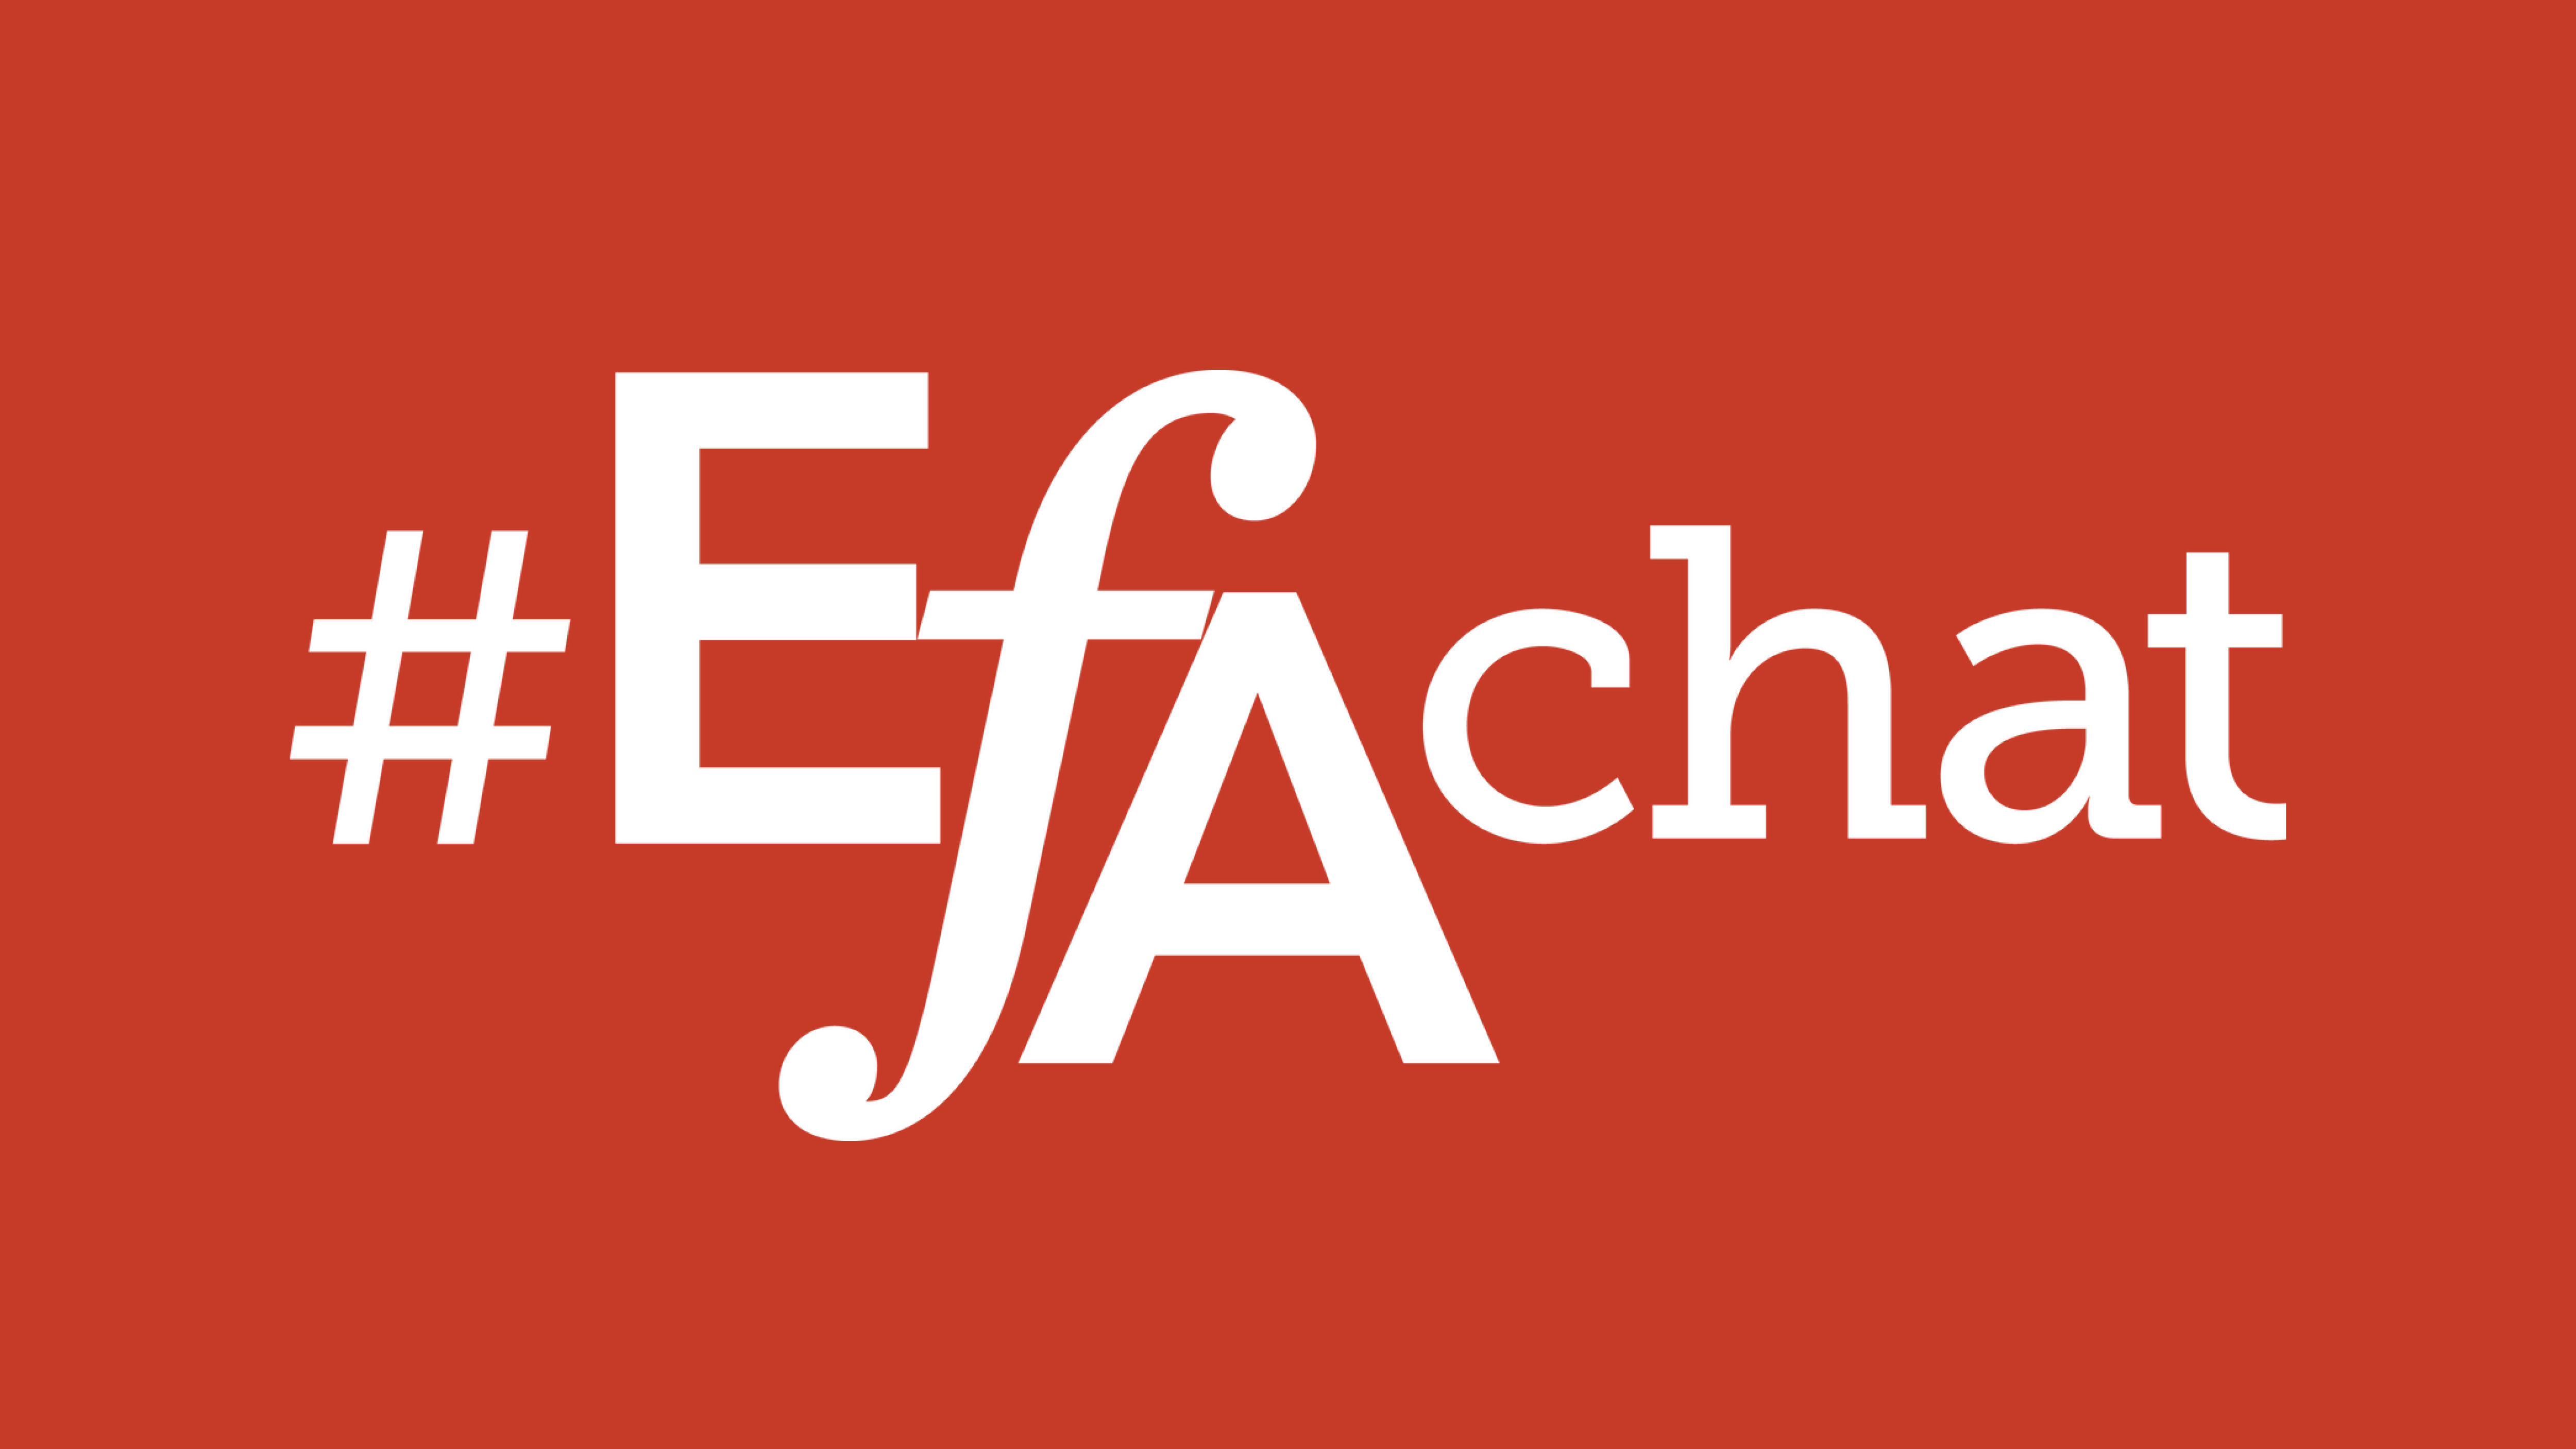 #EFAChat in white letters on a red background.